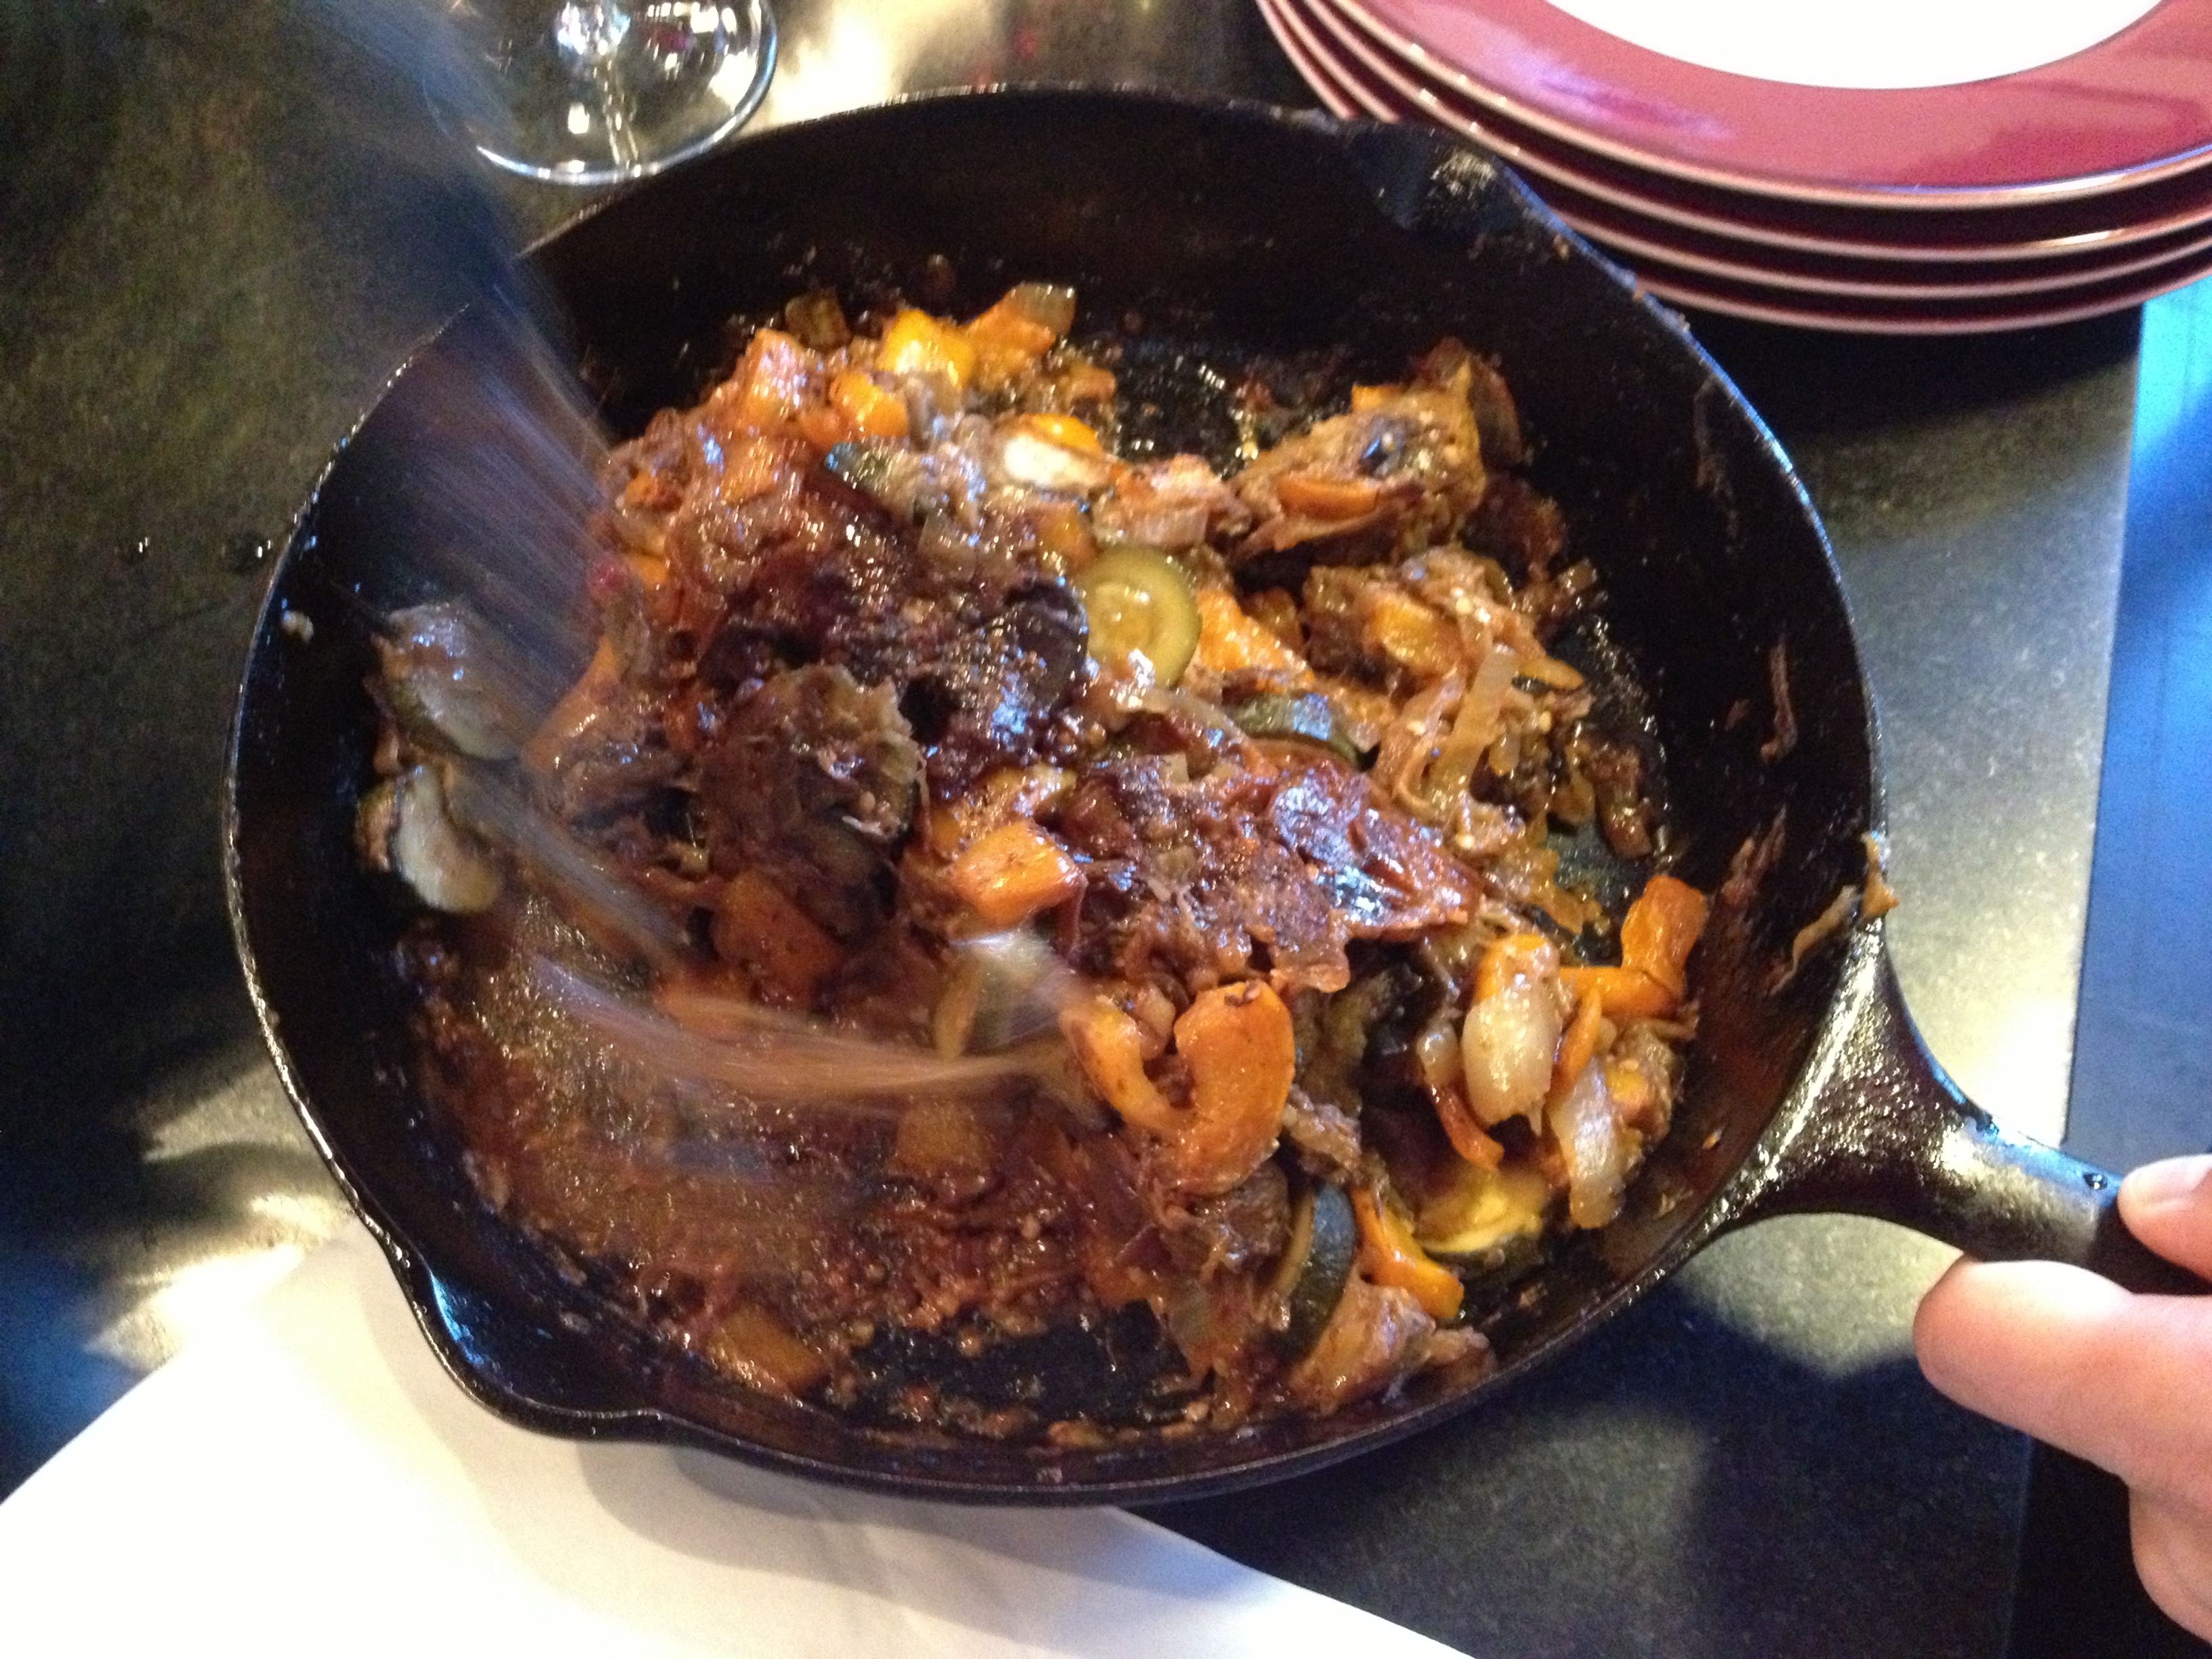 Skillet ratatouille being made in a black cast iron skillet, recipe from Food and Wine.